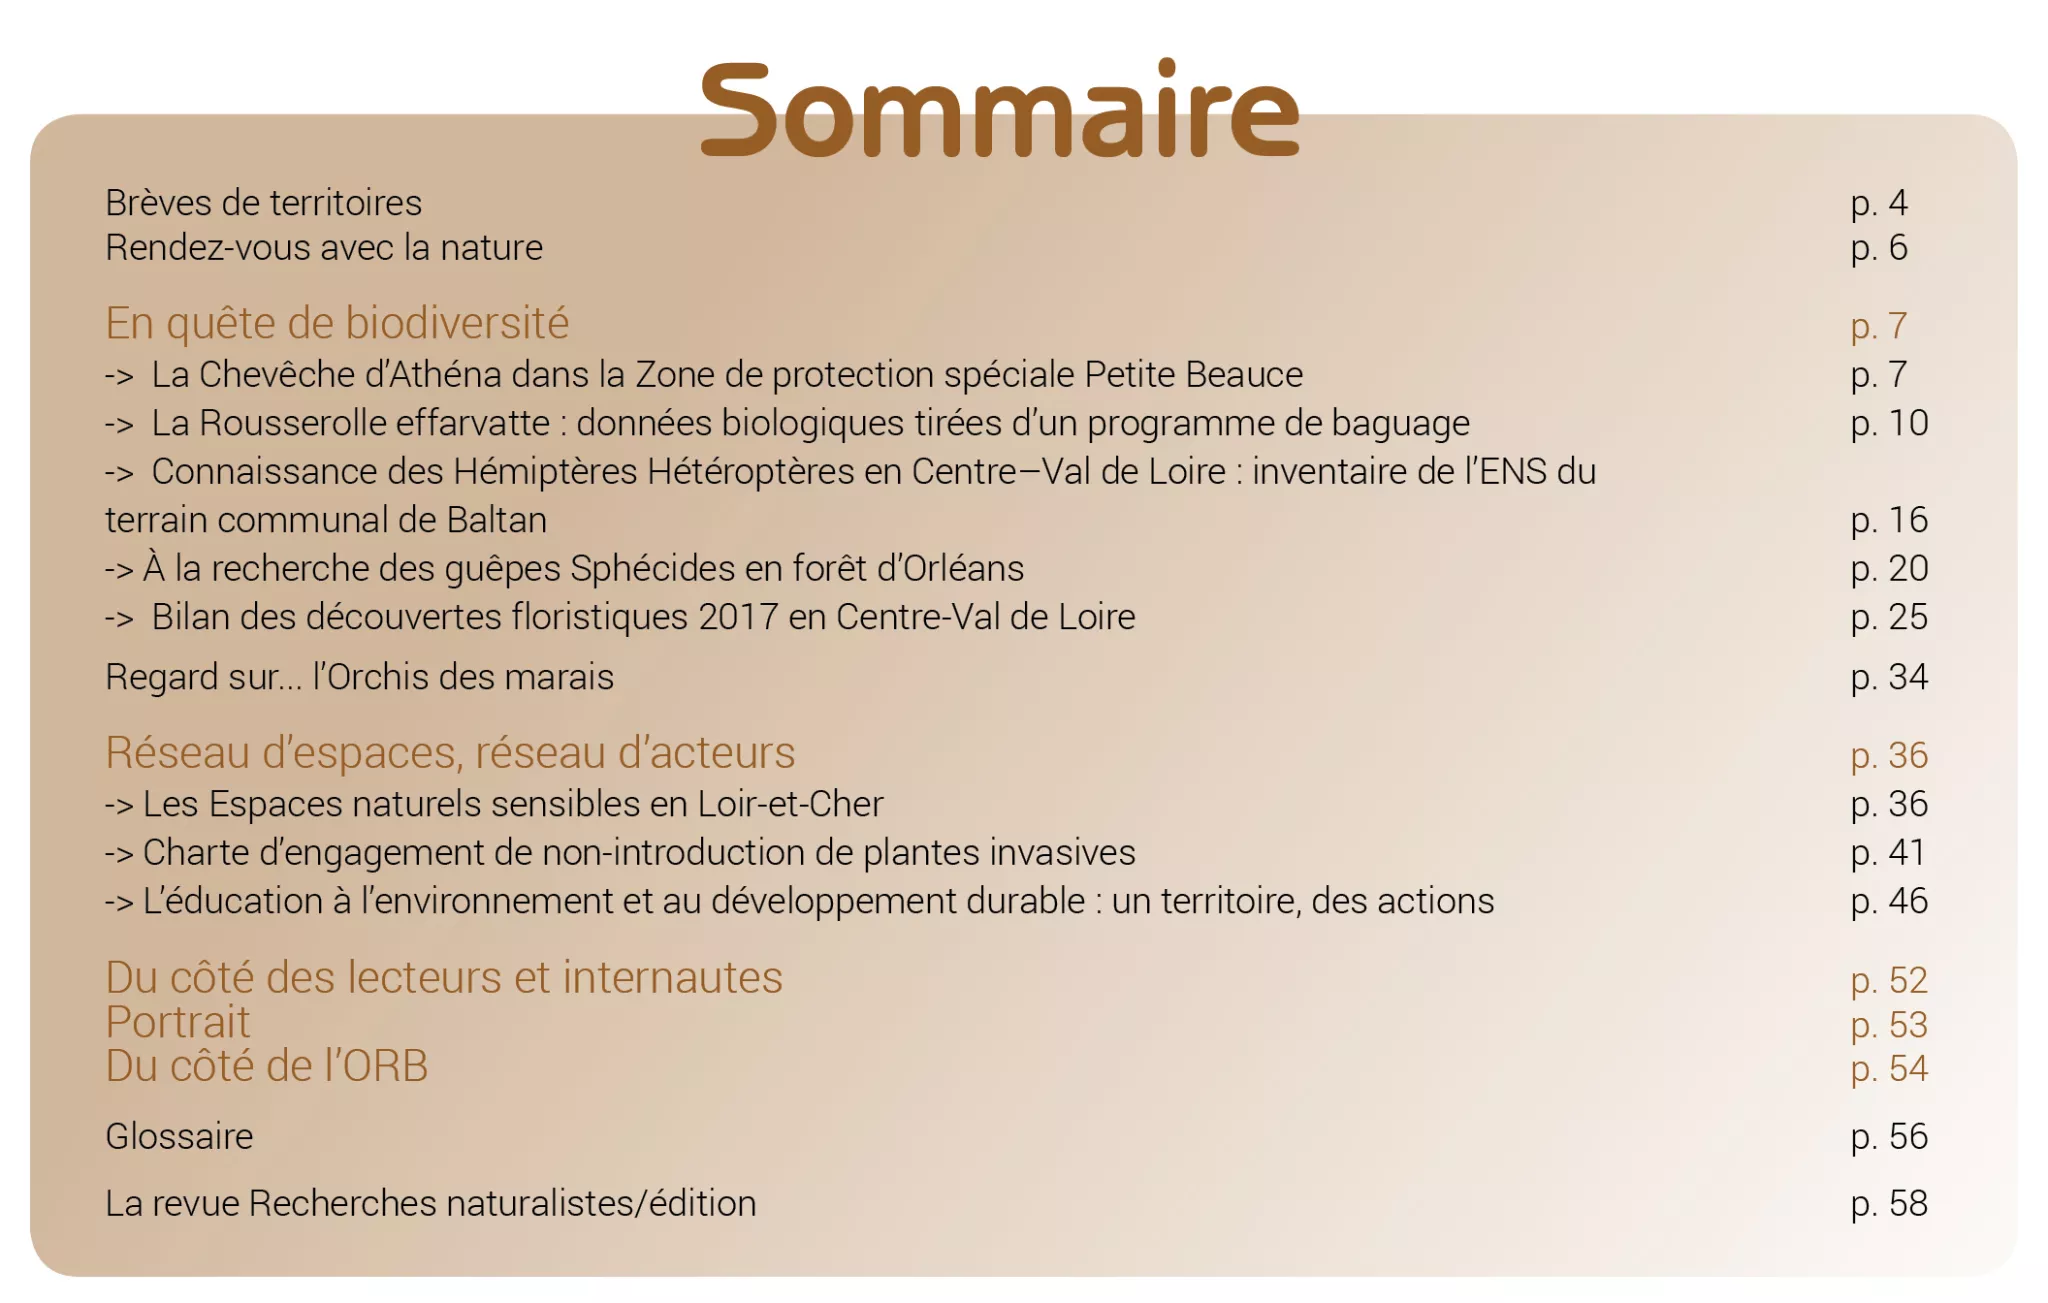 Sommaire RN 07